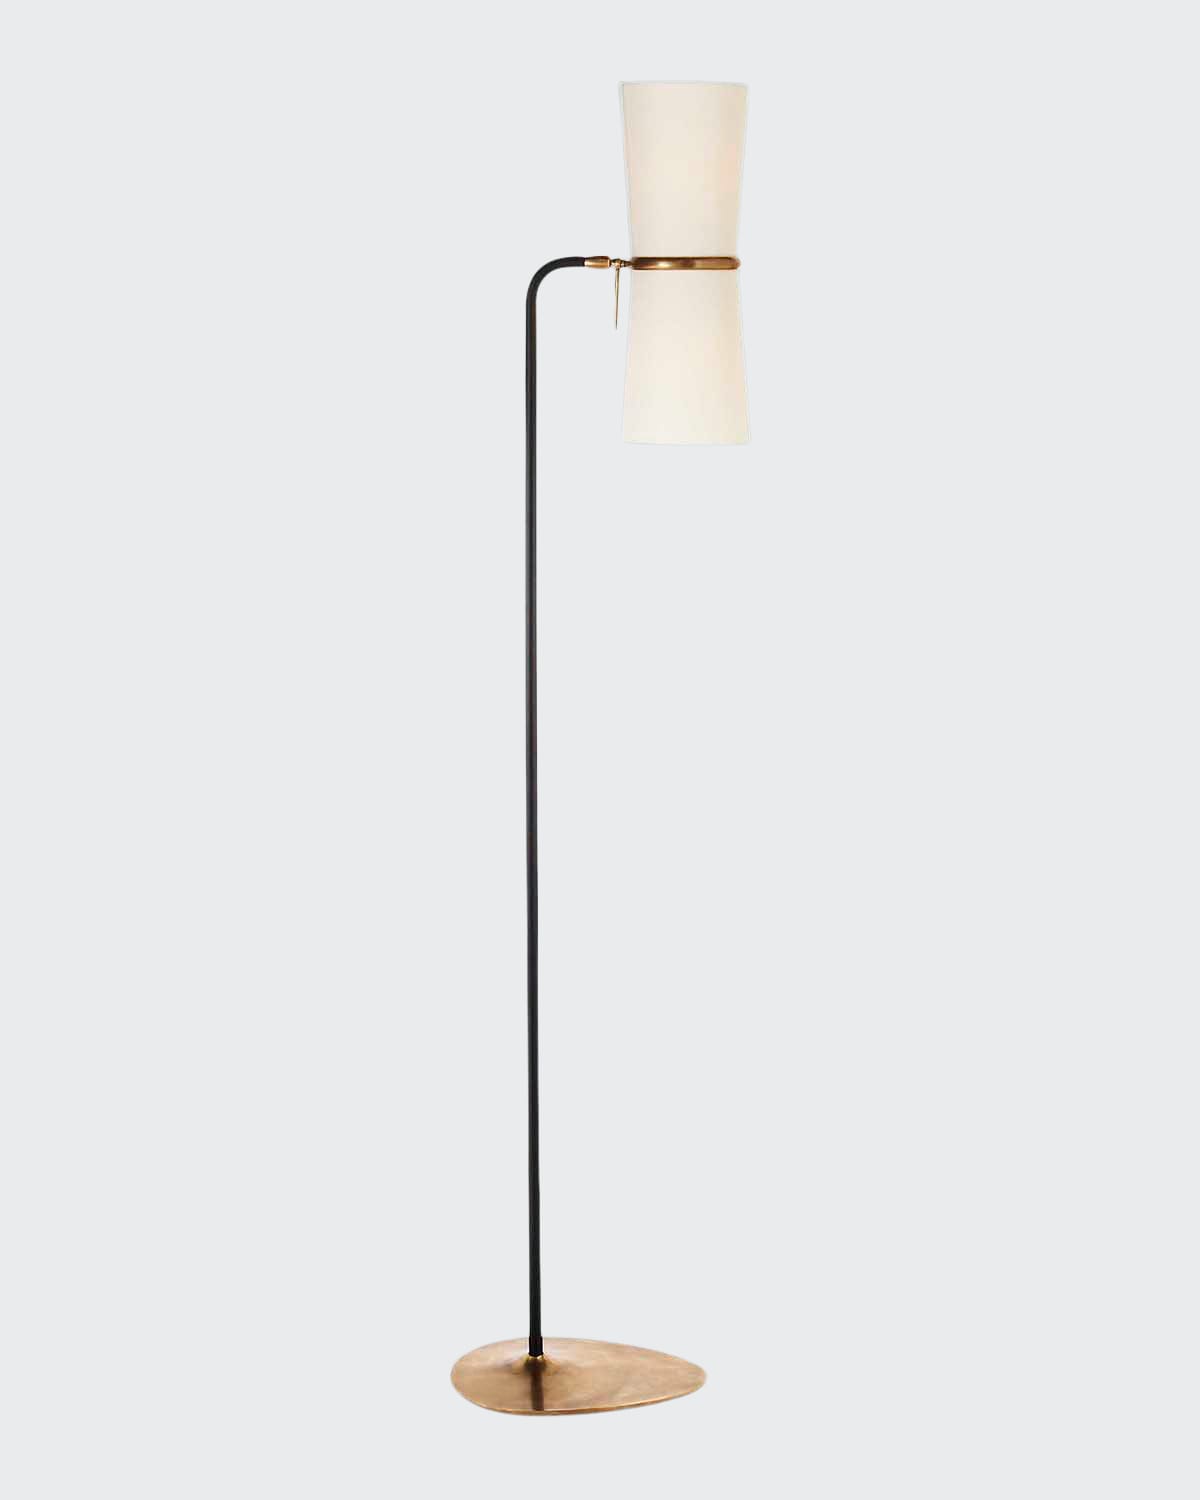 Aerin For Visual Comfort Signature Clarkson Floor Lamp By Aerin